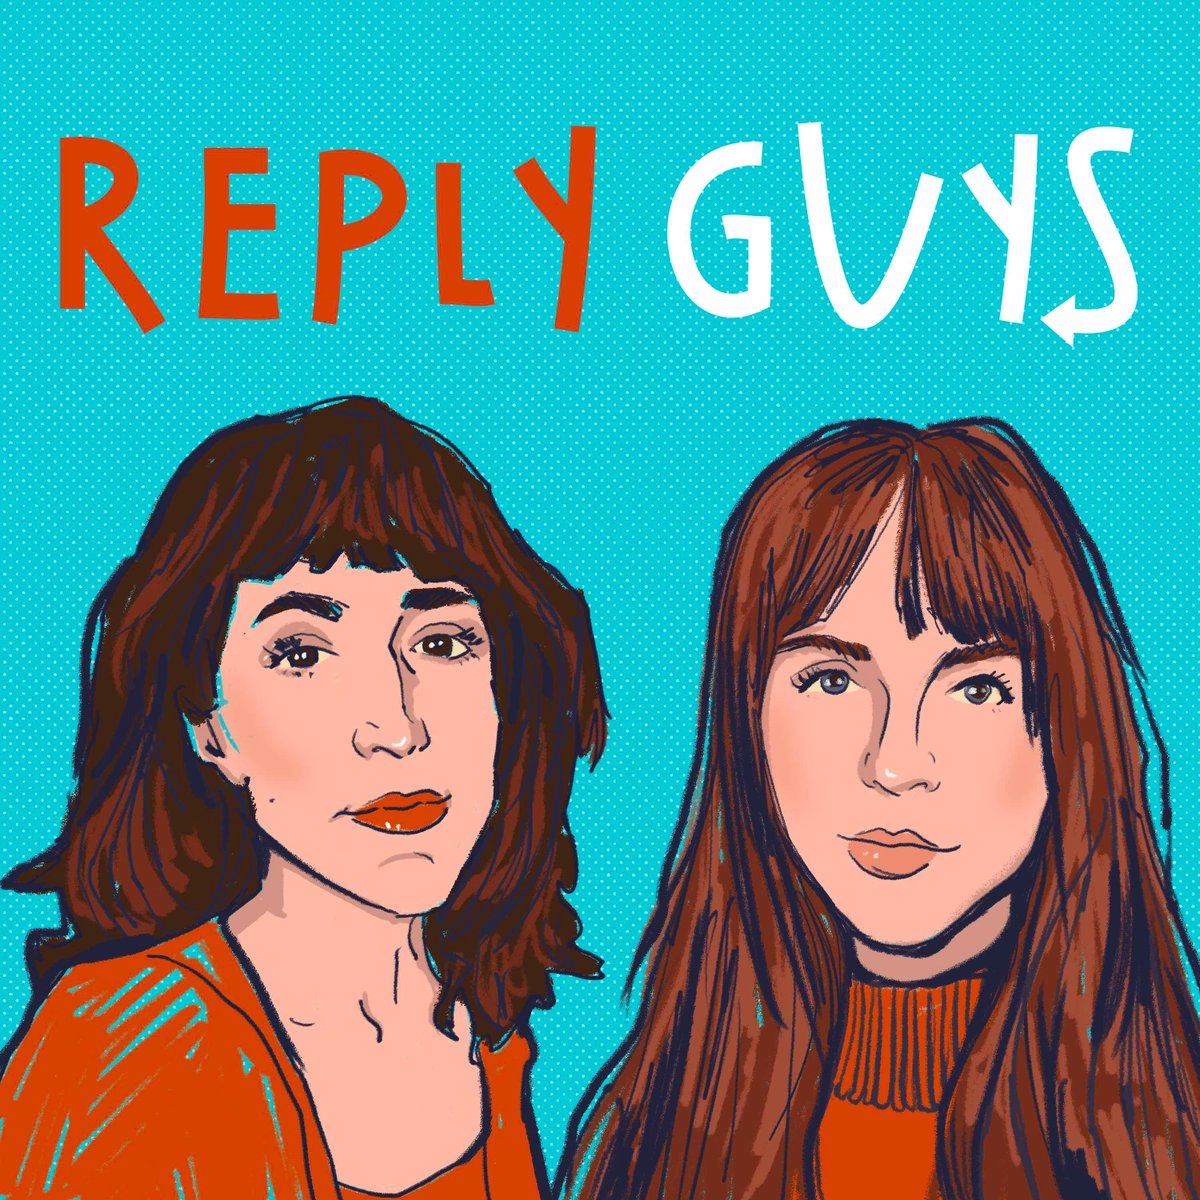  @ReplyGuysPod! A leftist, feminist comedy podcast hosted by  @katewillett and  @ohJuliatweets!